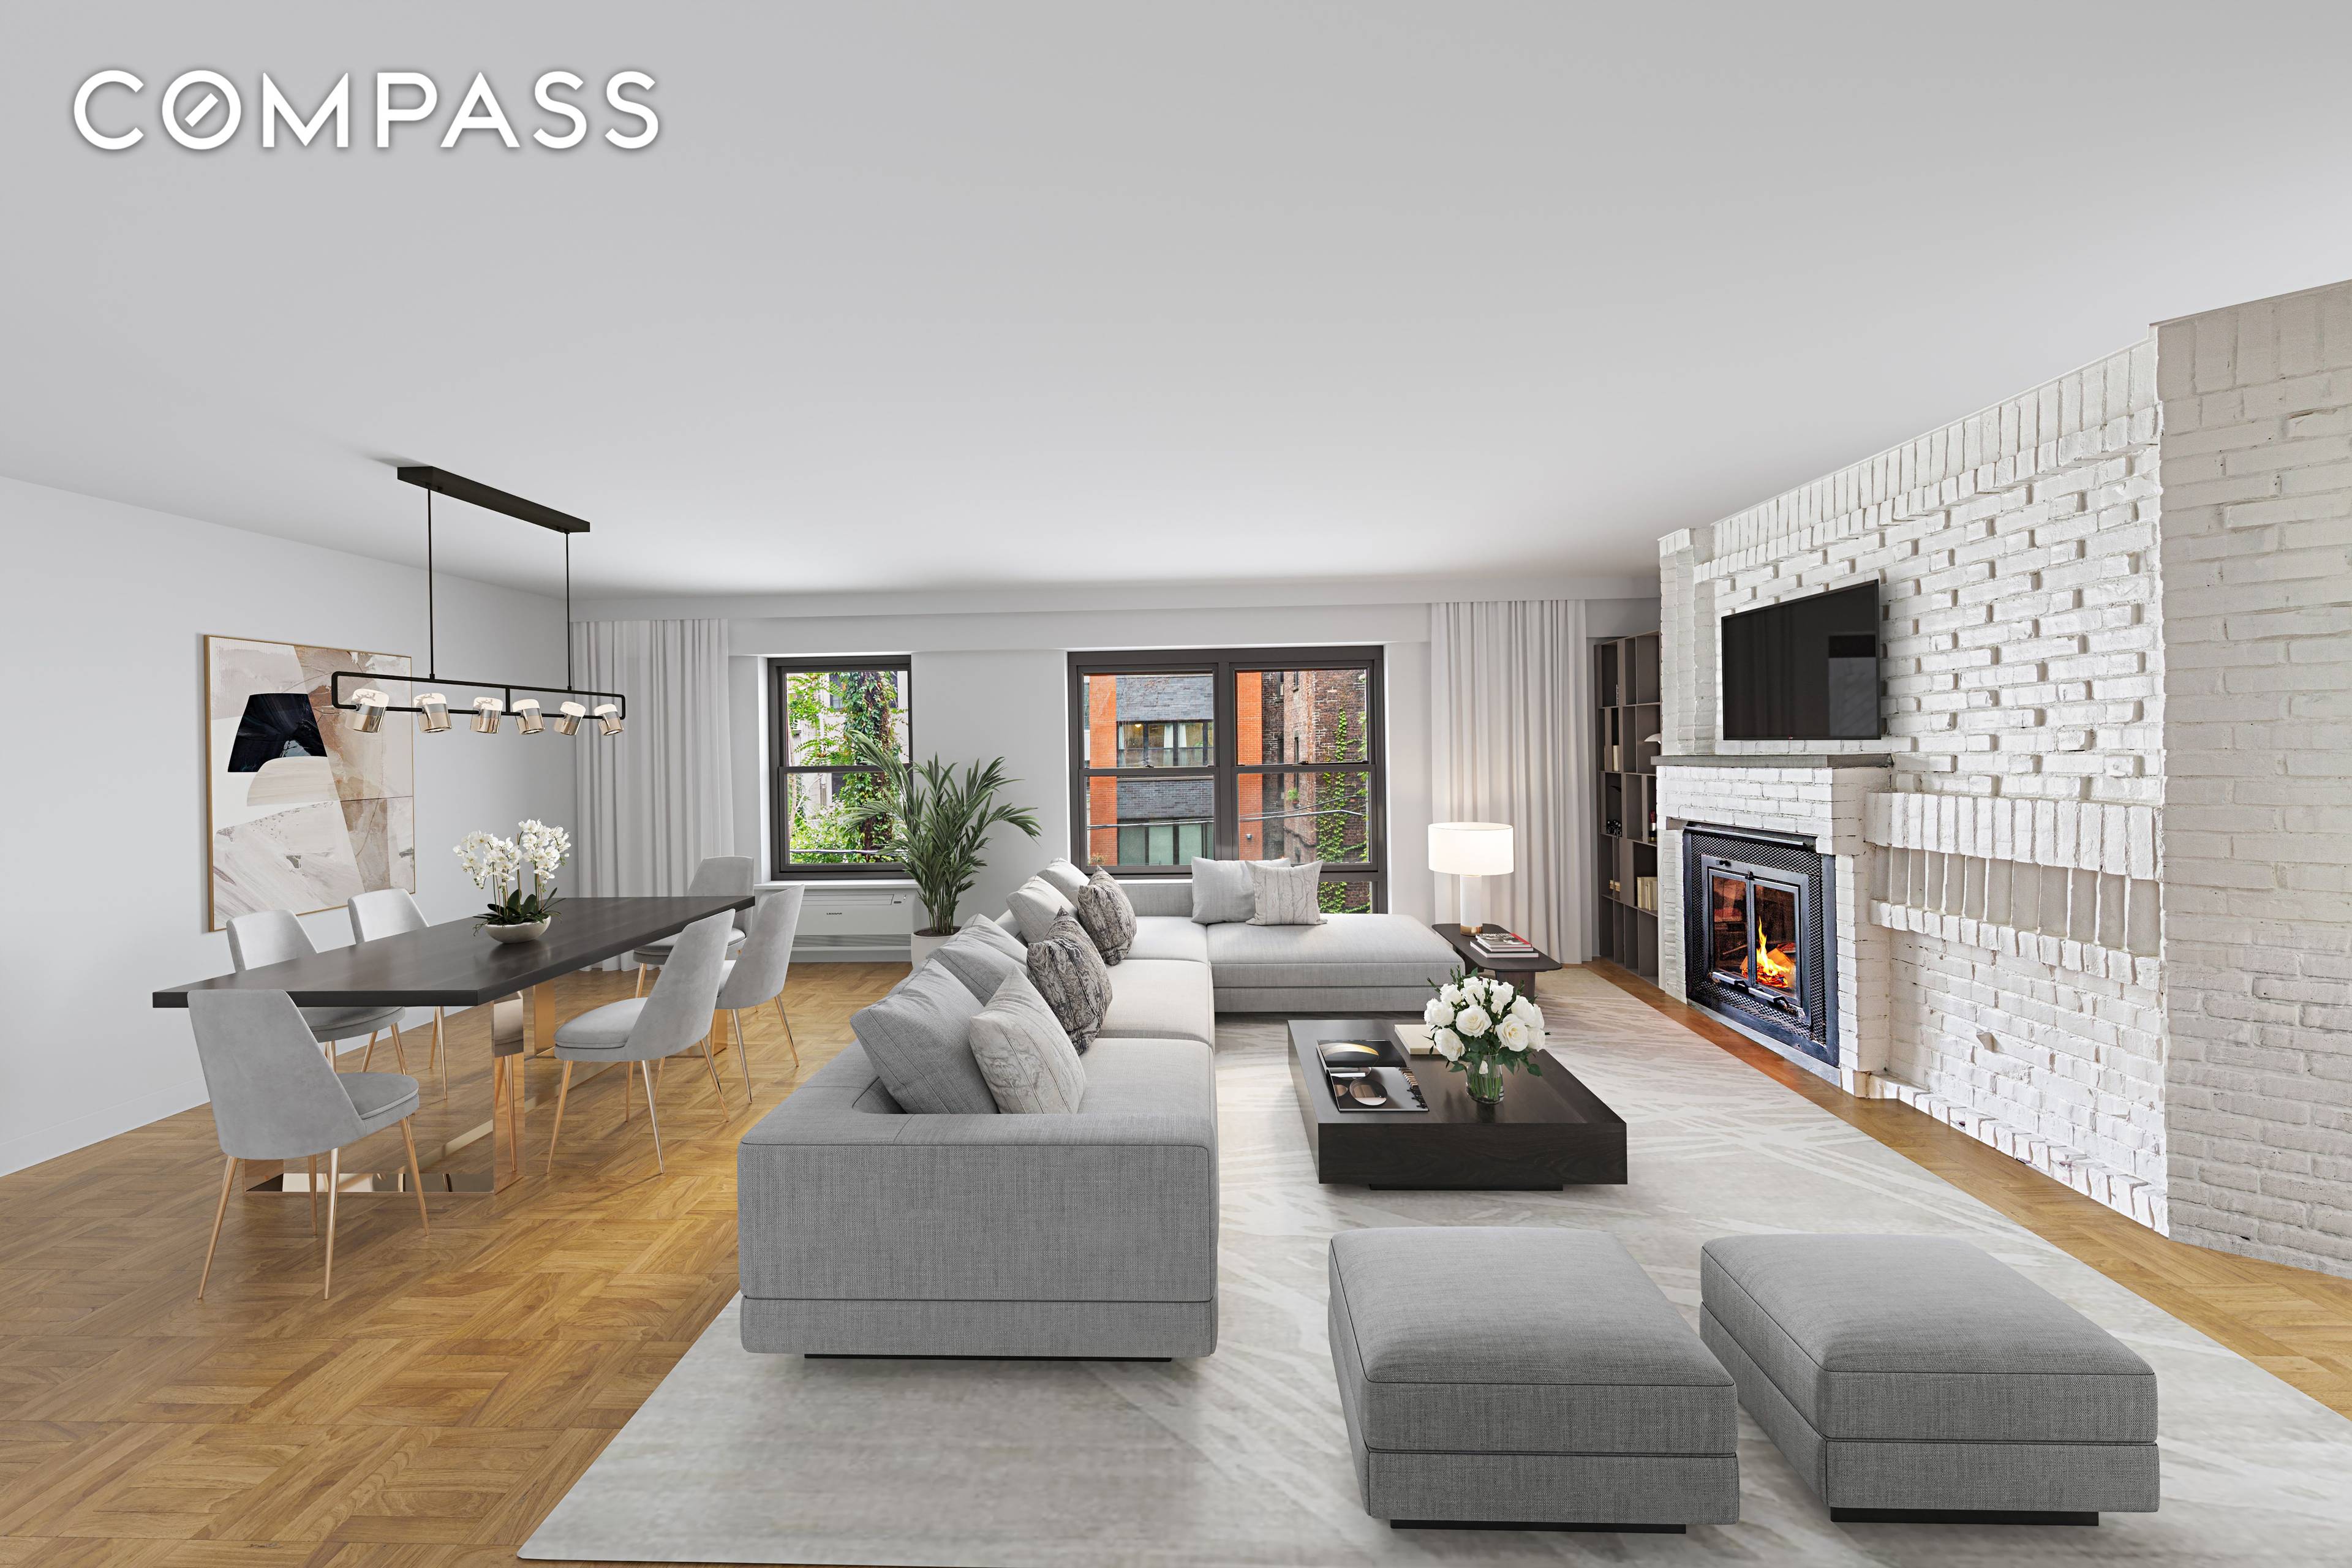 This architecturally unique townhouse in the heart of Chelsea offers a wonderful south facing garden view, a wood burning fireplace and lots of storage.